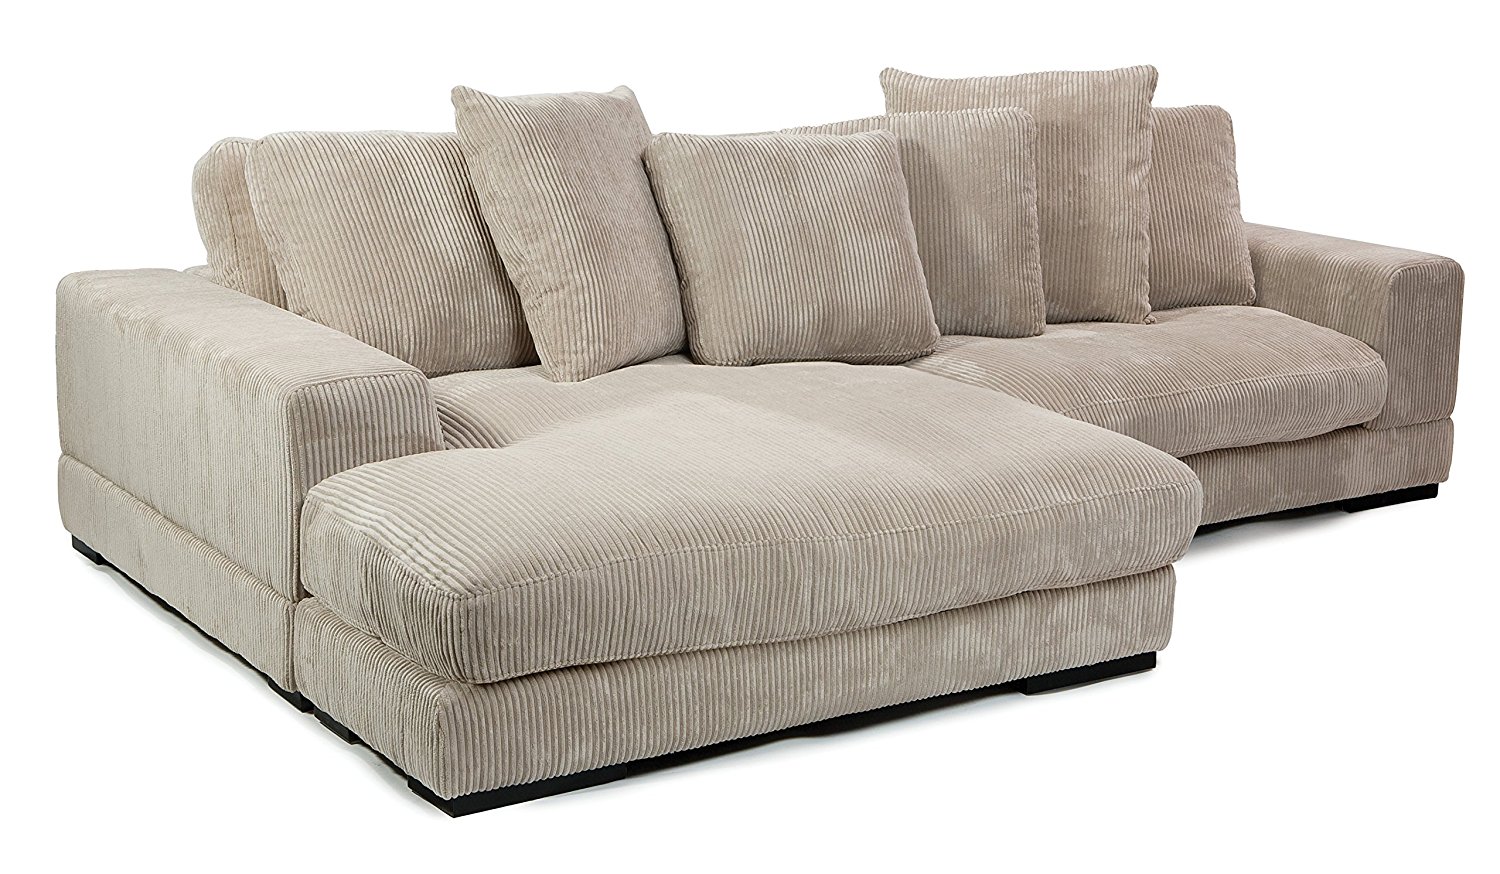 Most Comfortable Sectional Couches Decor Ideas